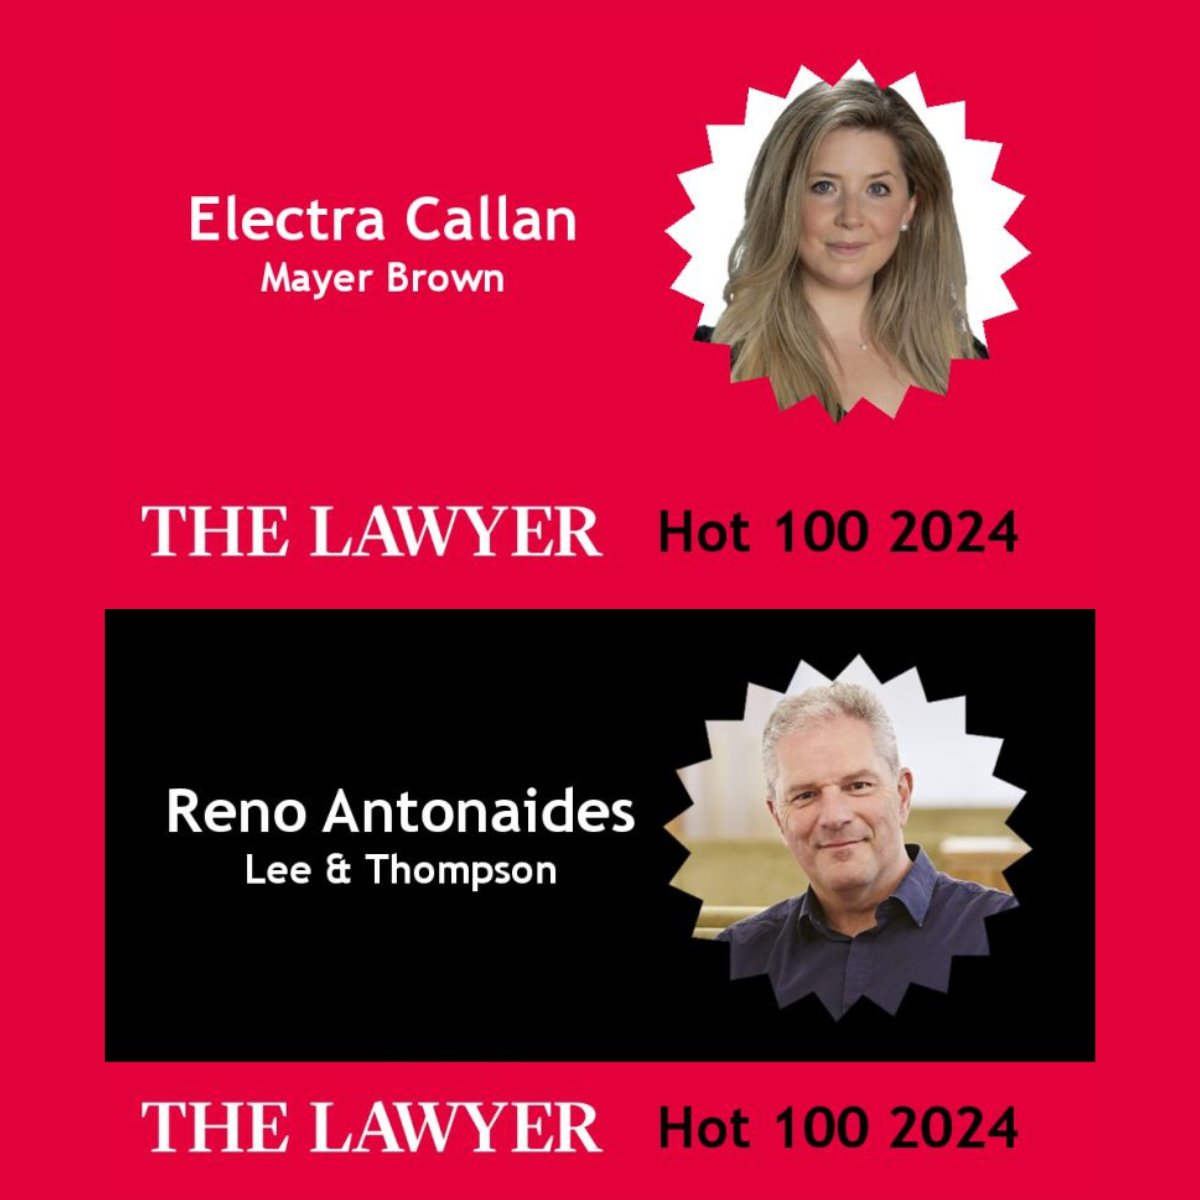 Thrilled to see two Alleyn’s alumni recognised in @TheLawyermag Hot 100 2024! Huge congratulations to @Mayer_Brown’s Electra Callan (Roper's 2006) and @LeeAndThompson’s Reno Antoniades (Tulley’s 1984). Full details: thelawyer.com/event/lawyer-h… #TheLawyerHot100 #AlwaysAlleyns